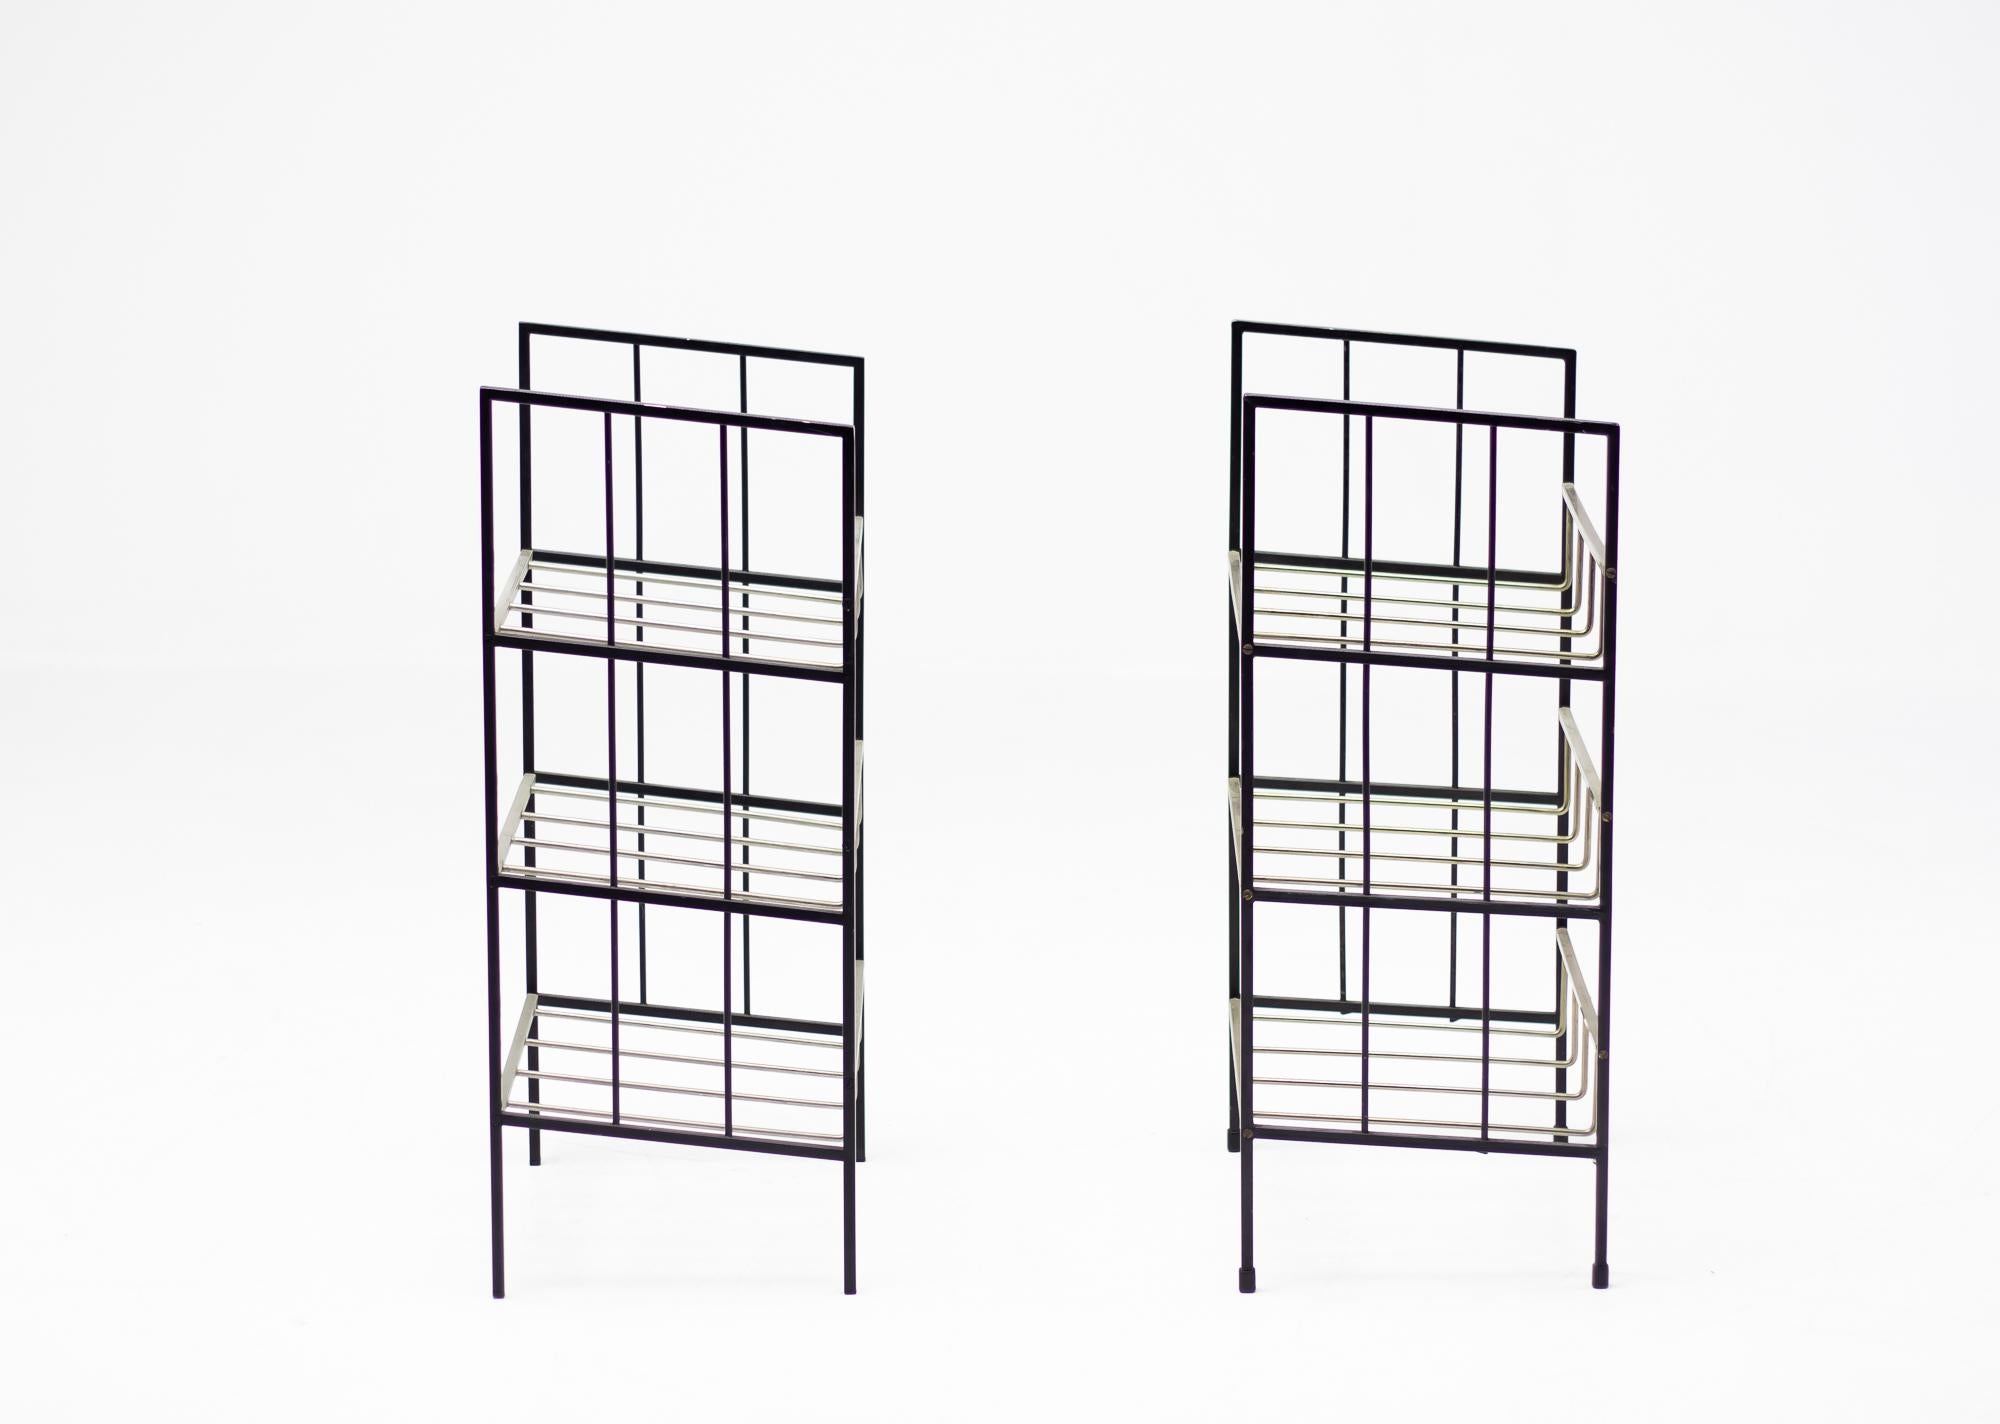 Modernist magazine / sheet music stand in the manner of Ernst Rockhausen & Söhne. 
Black steel frame with nickel plated bars to carry your magazines. 
Elegant piece with original patina, would be both a practical as a decorative element in any